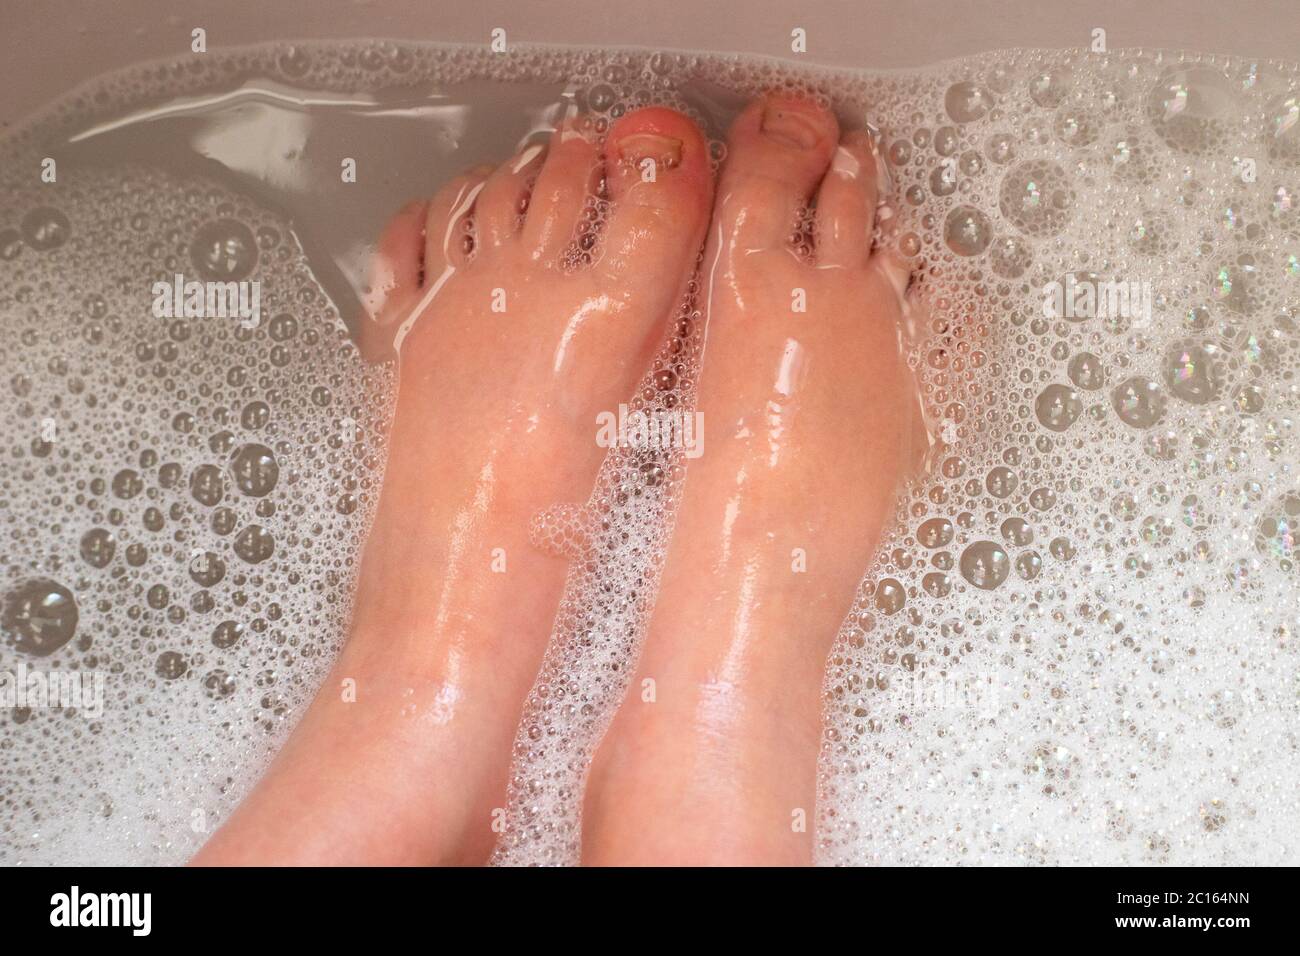 Washing little child feet in bubbling and foamy water. Close-up. Stock Photo